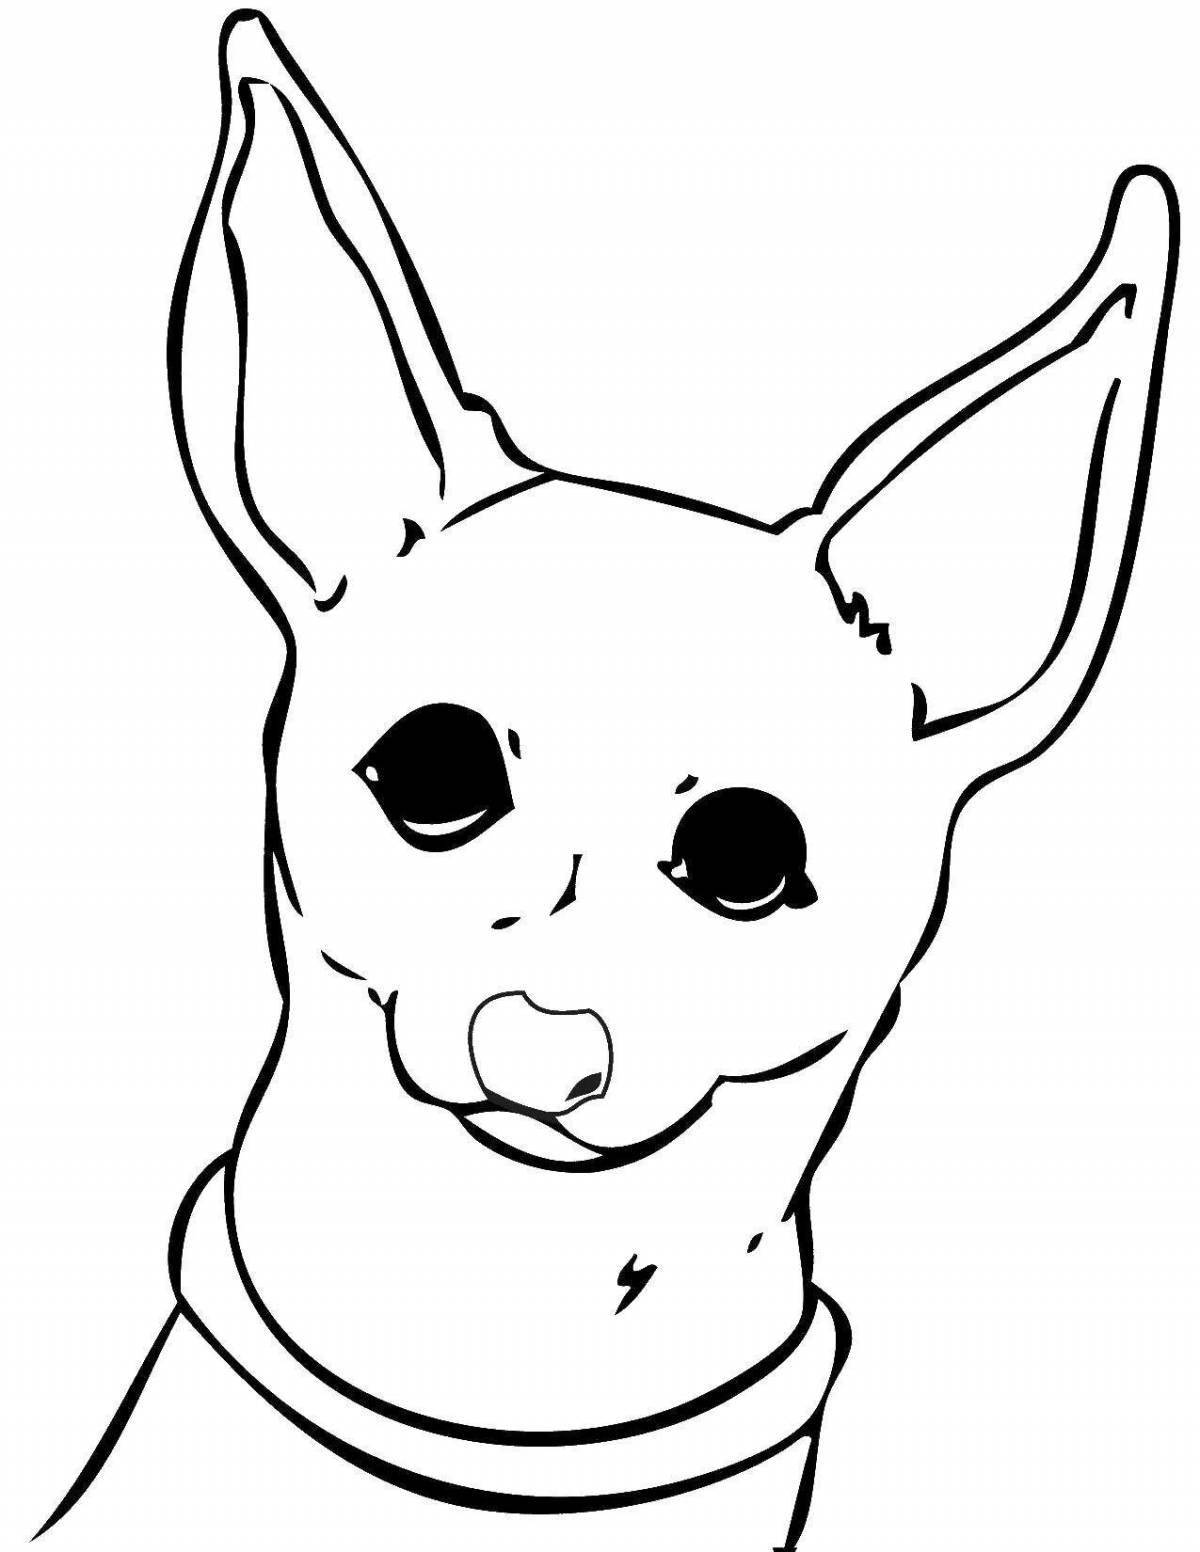 Chihuahua funny dog ​​coloring page